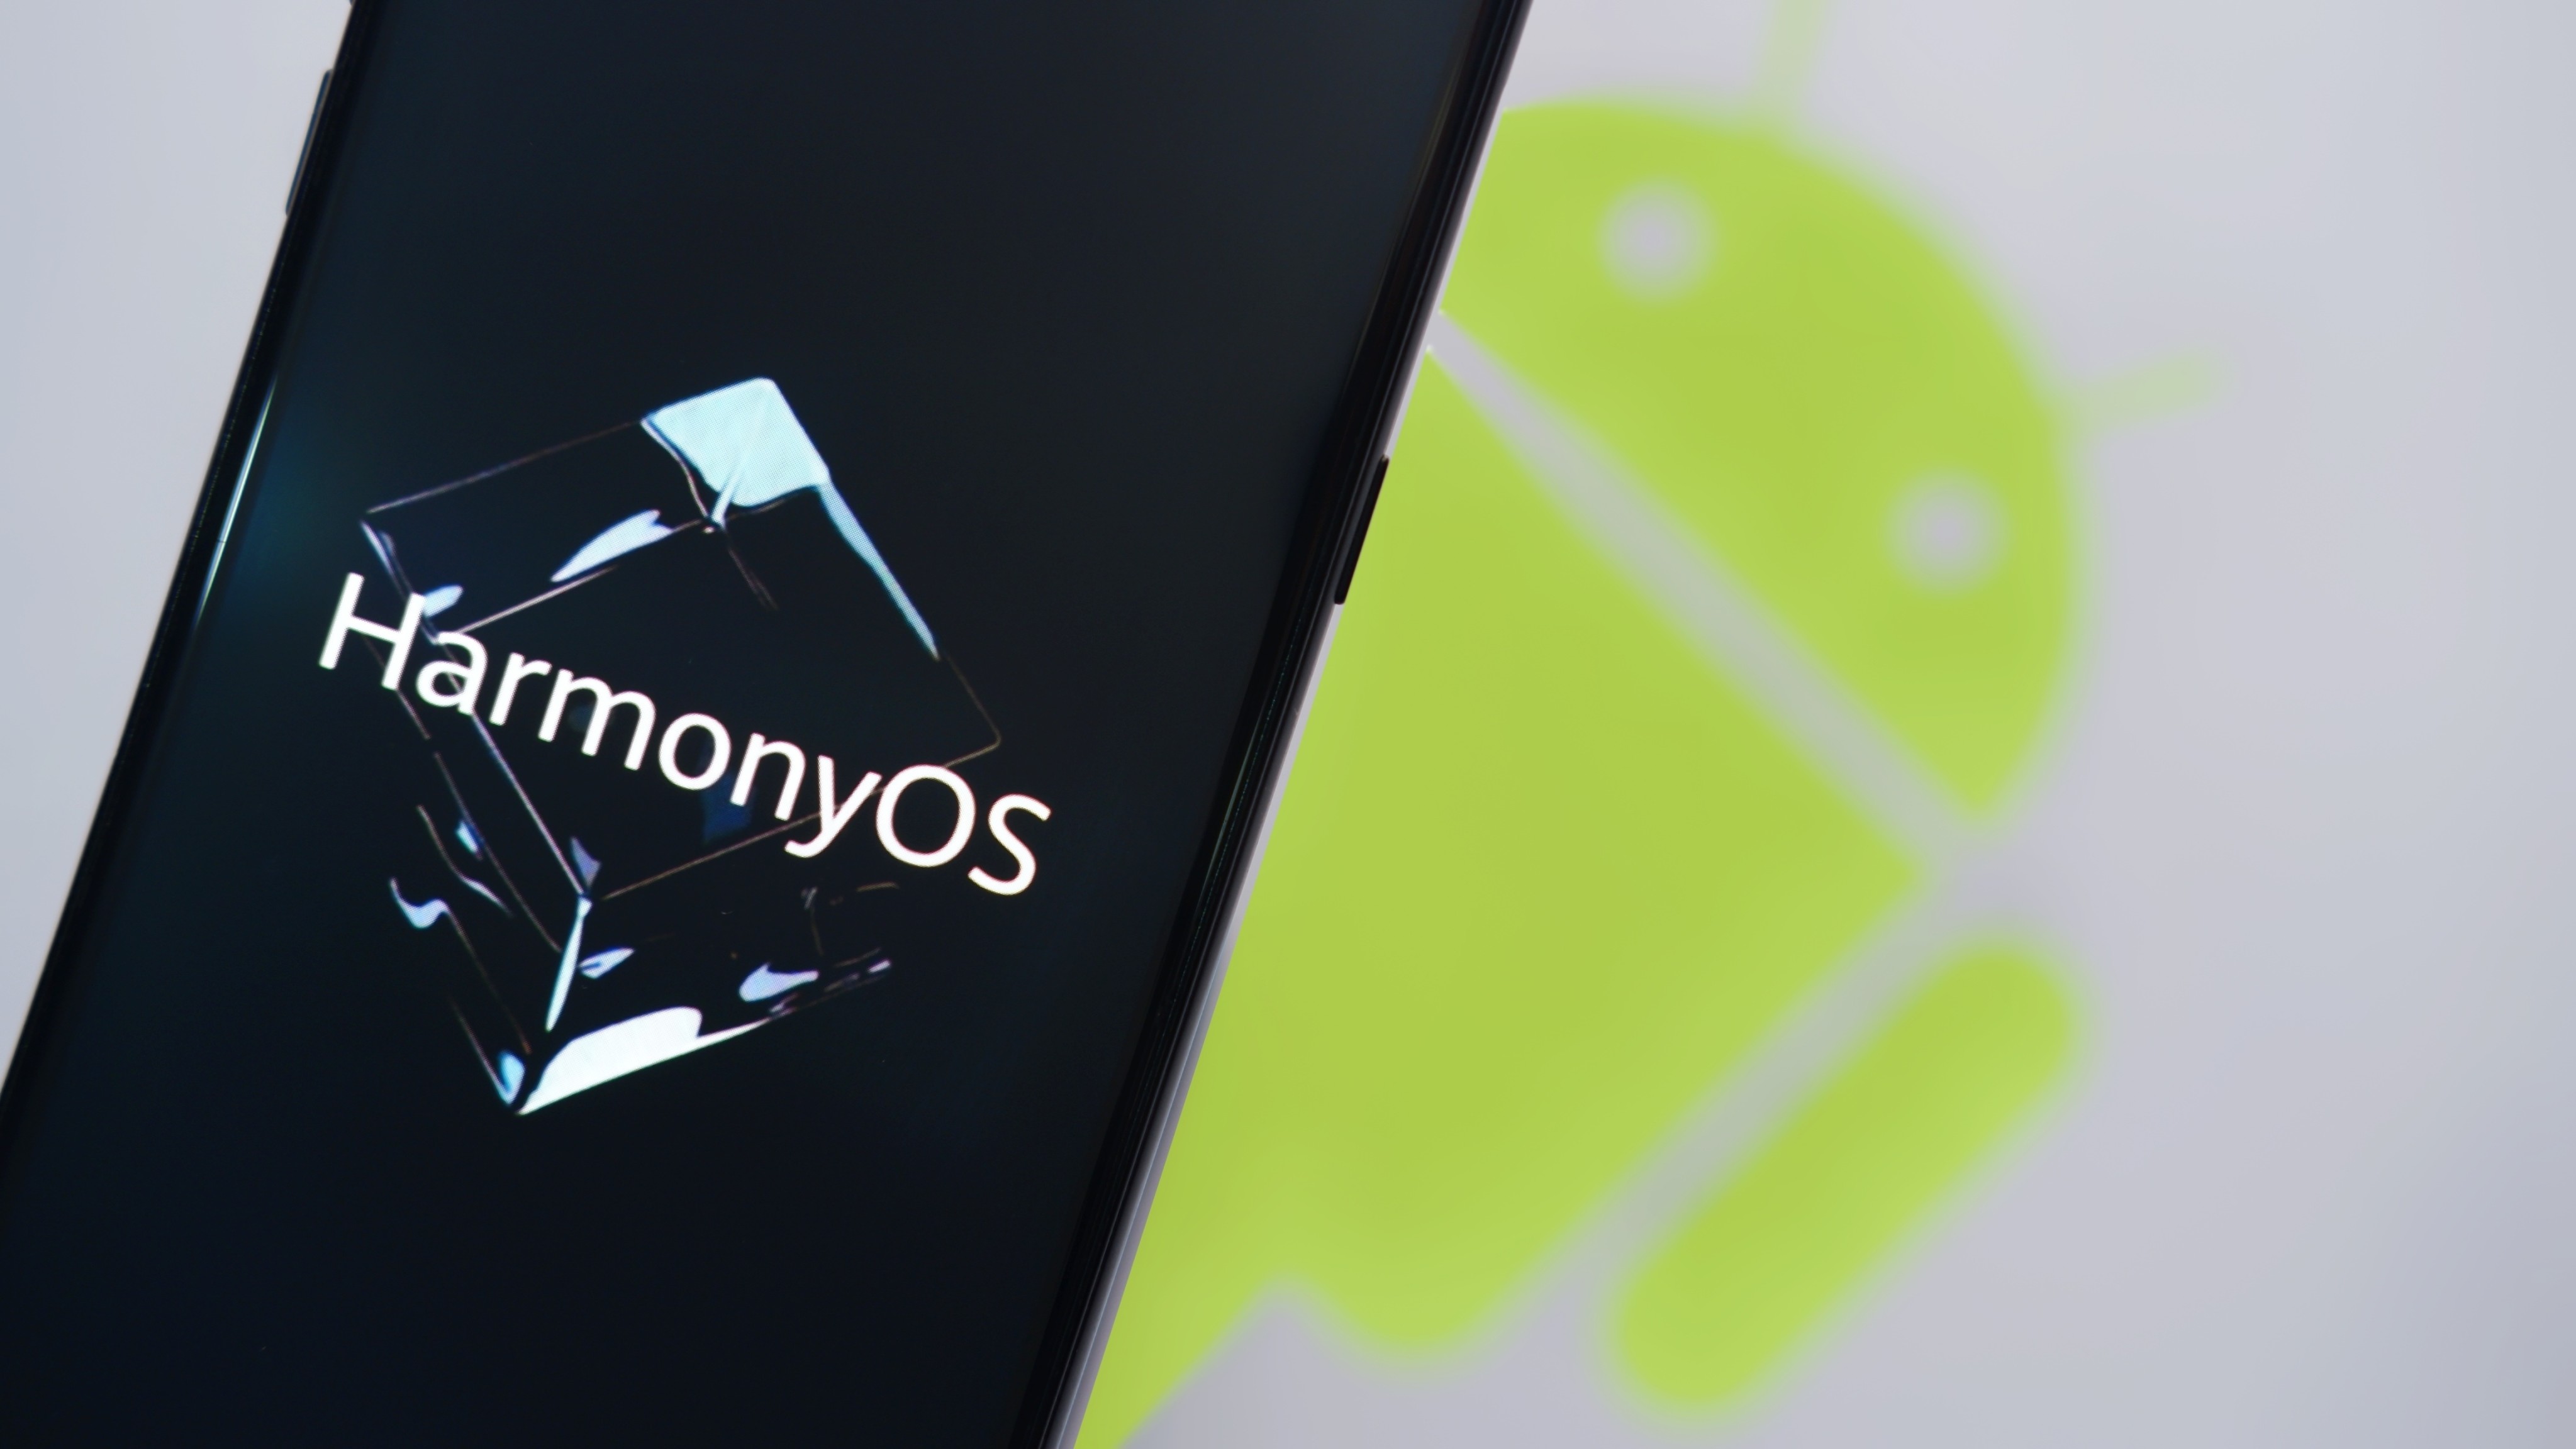 The next iteration of Huawei Technologies’ mobile platform, HarmonyOS Next, will involve removing support for Android-based apps. Photo: Shutterstock